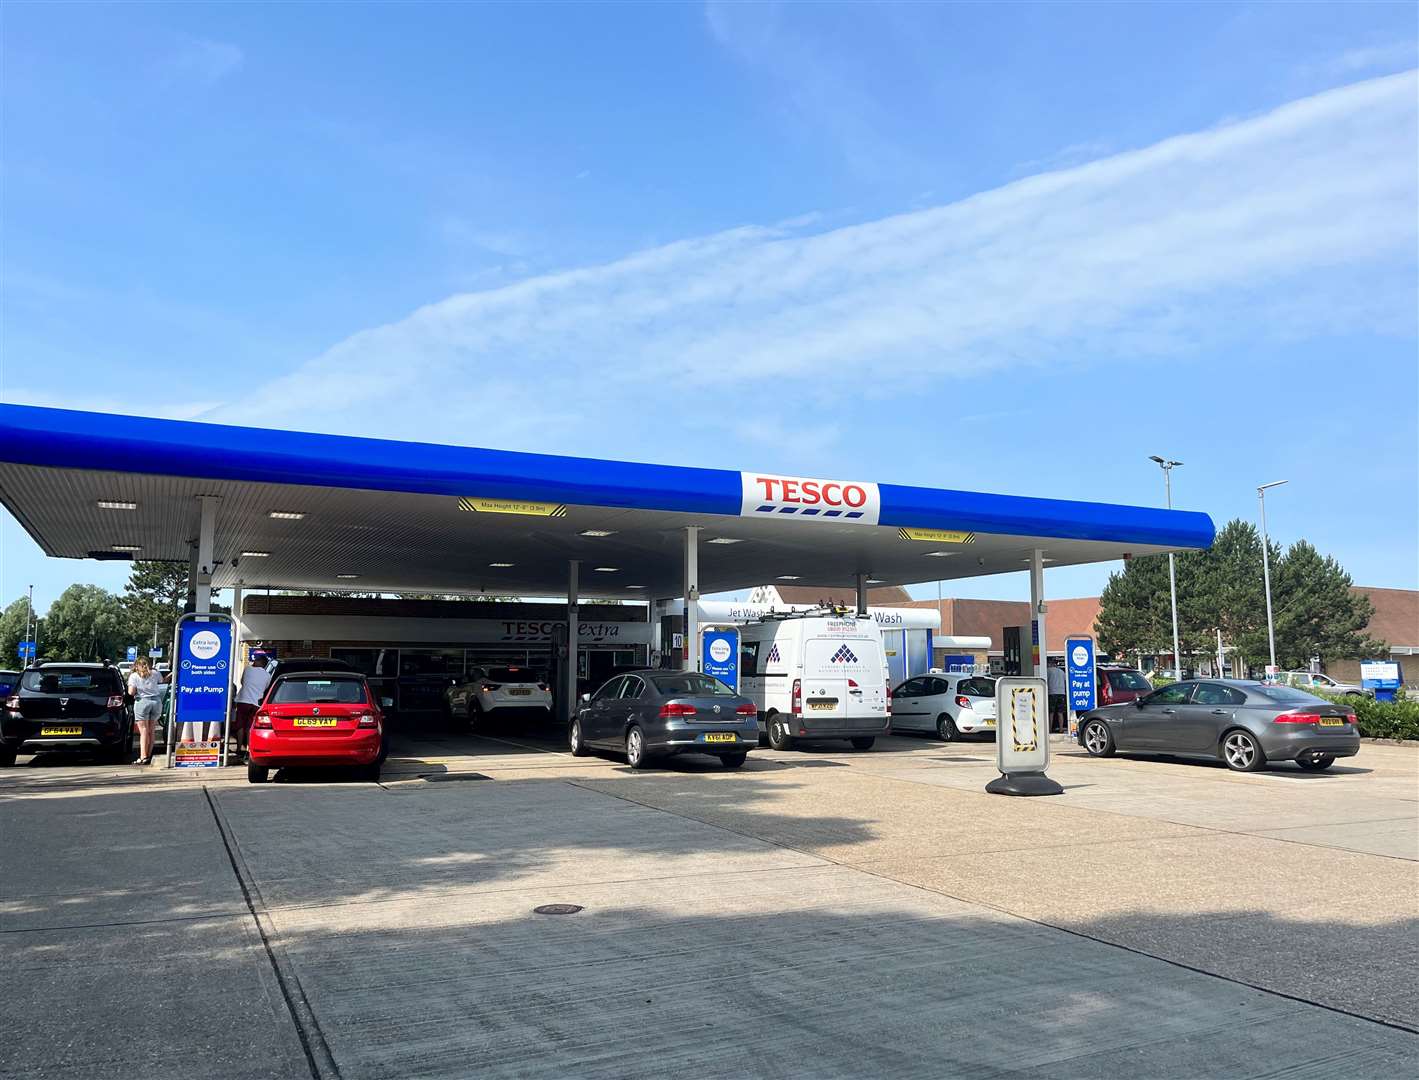 Drivers filling up at the Tesco in Park Farm, Ashford, were restricted temporarily to pay-at-pump only